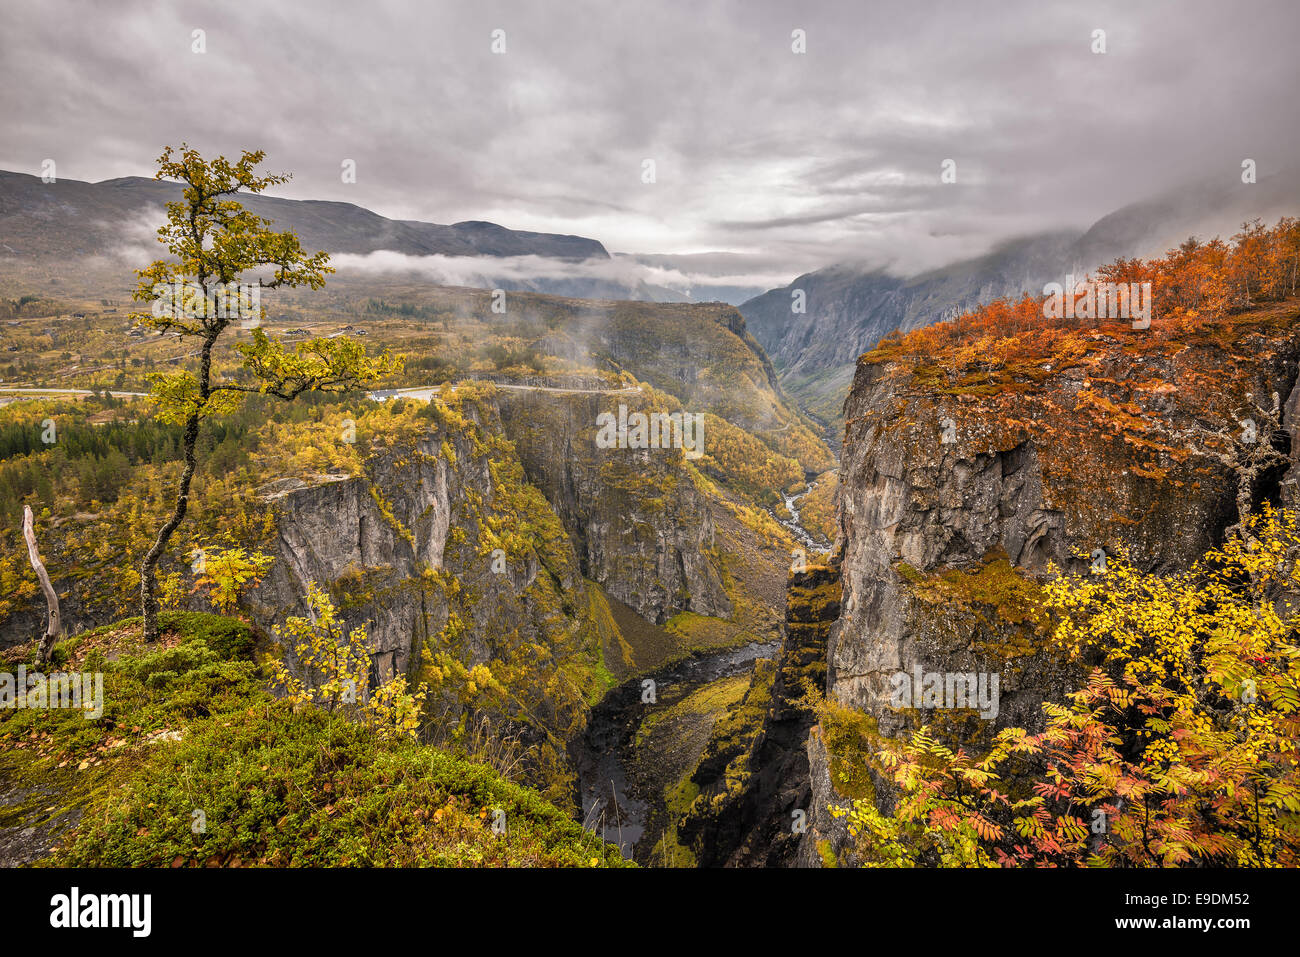 Mabodalen valley situated betwen Hardangervidda and Hardangerfjord National Parks,  in the municipality of Eidfjord, Norway Stock Photo